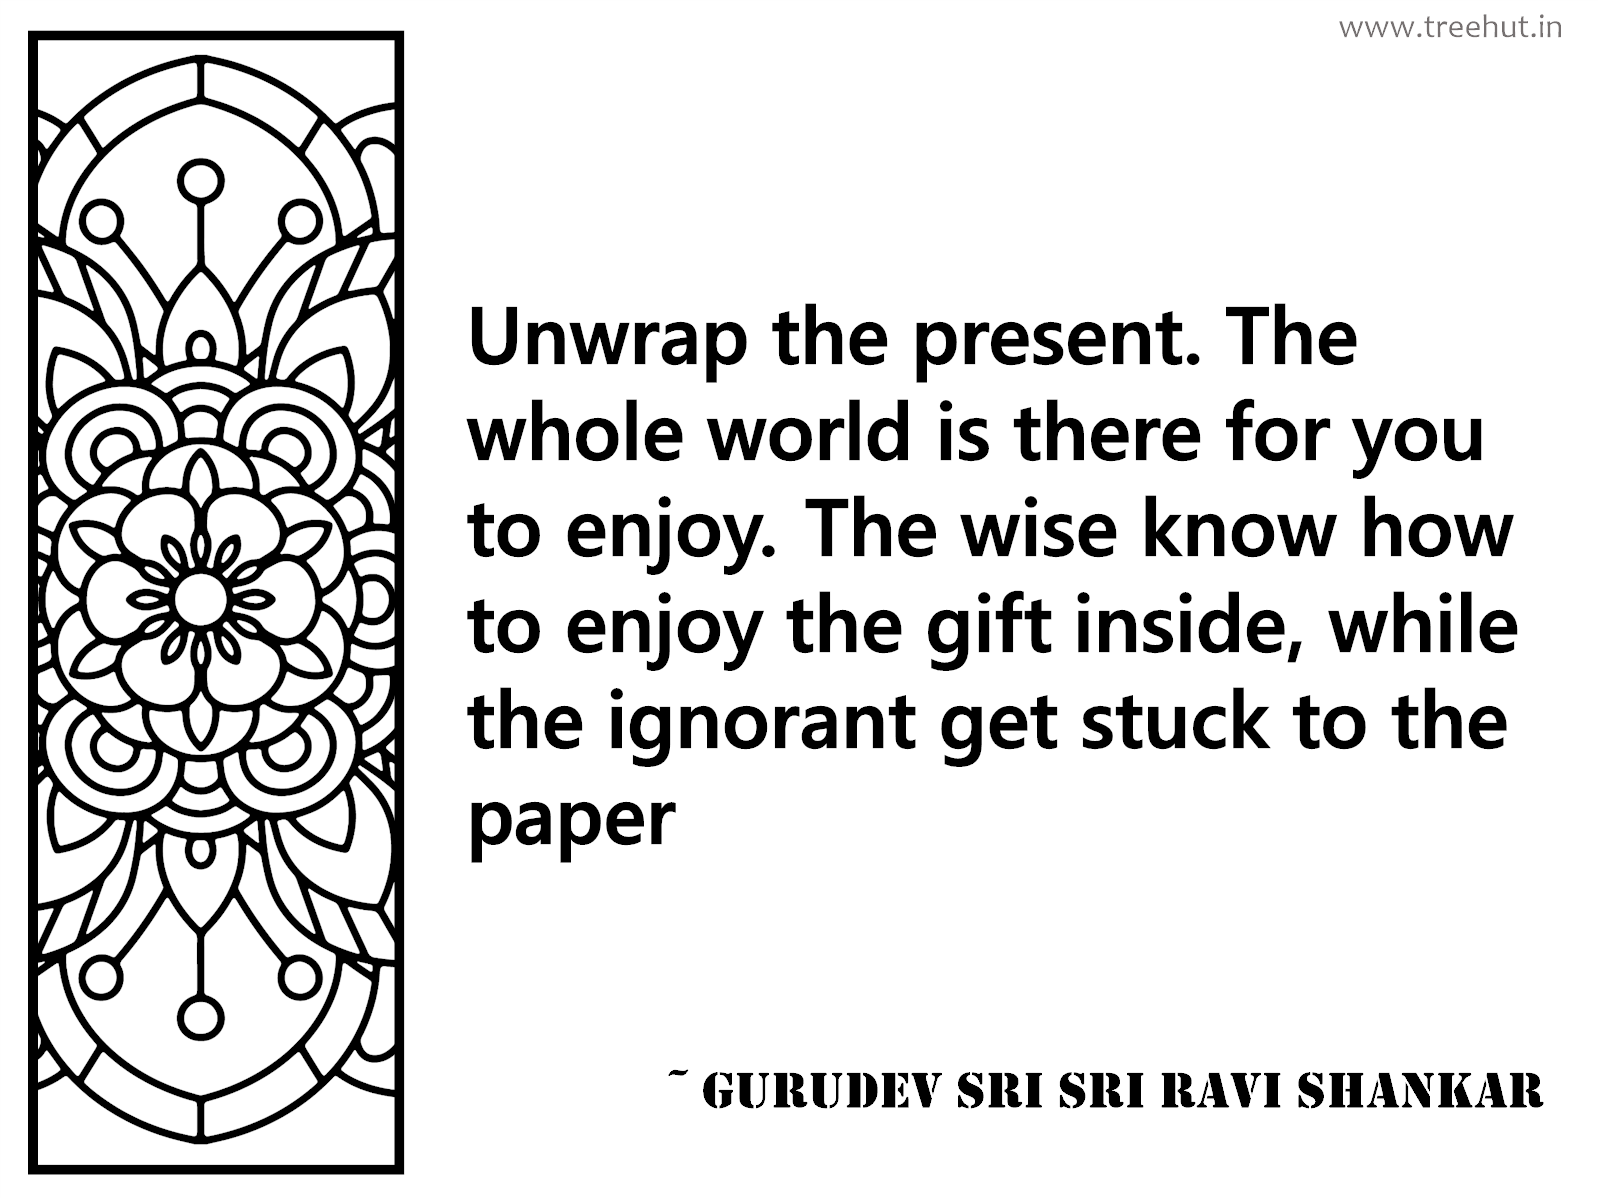 Unwrap the present. The whole world is there for you to enjoy. The wise know how to enjoy the gift inside, while the ignorant get stuck to the paper Inspirational Quote by Gurudev Sri Sri Ravi Shankar, coloring pages